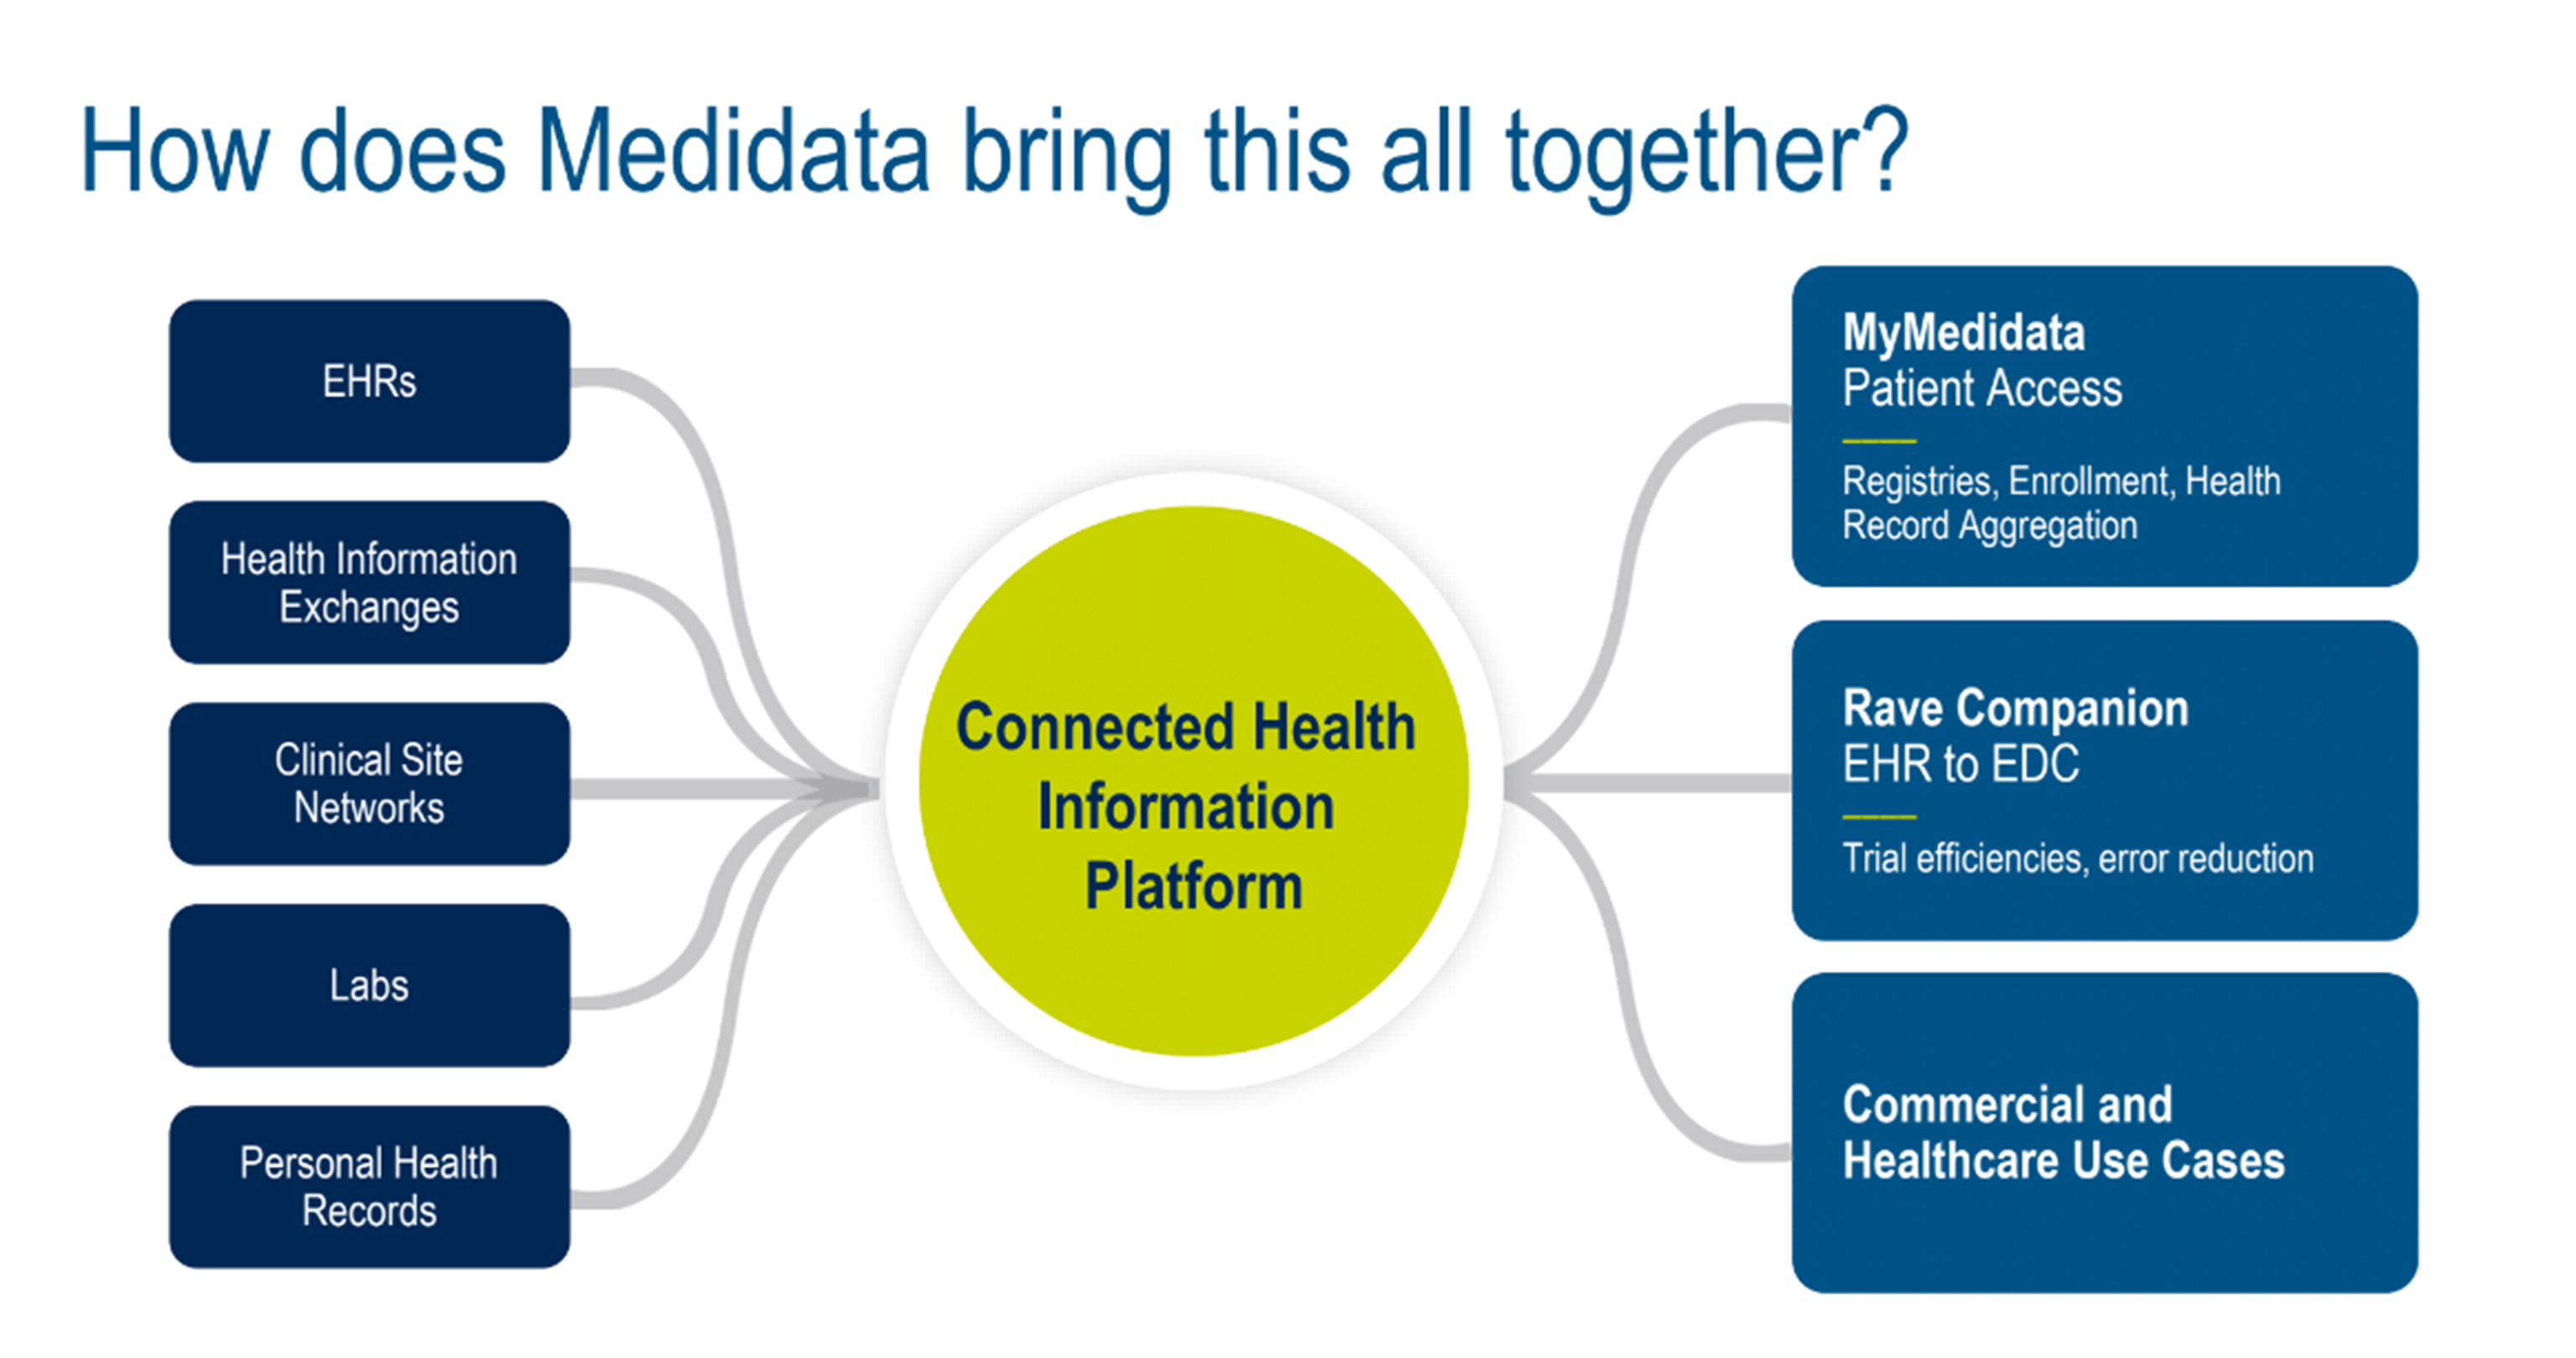 How does Medidata bring this all together?